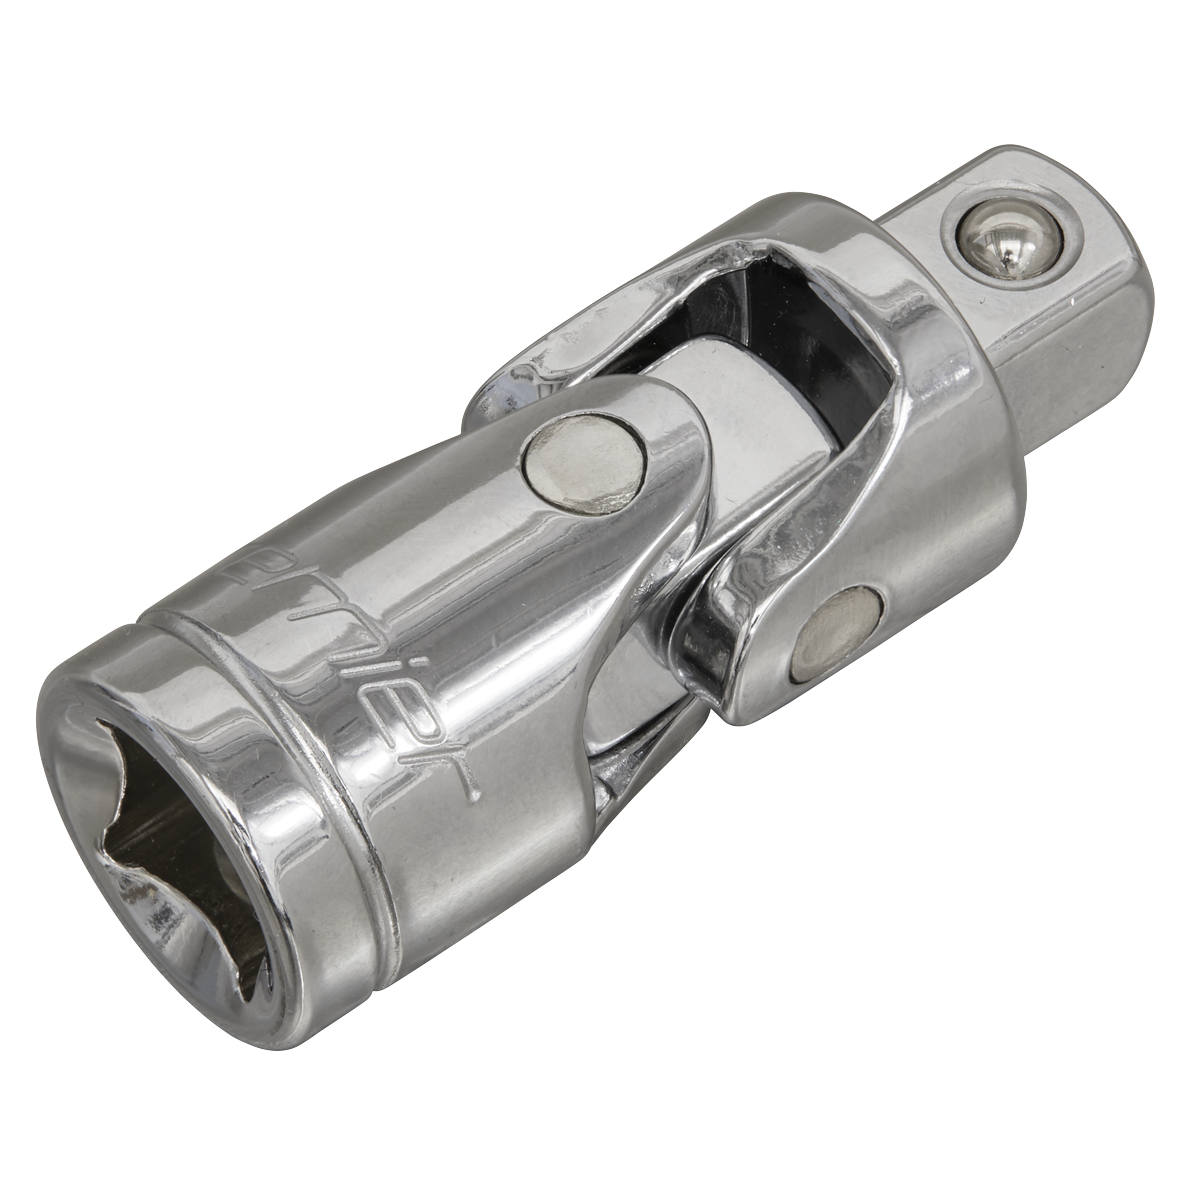 Sealey Universal Joint 3/8"Sq Drive